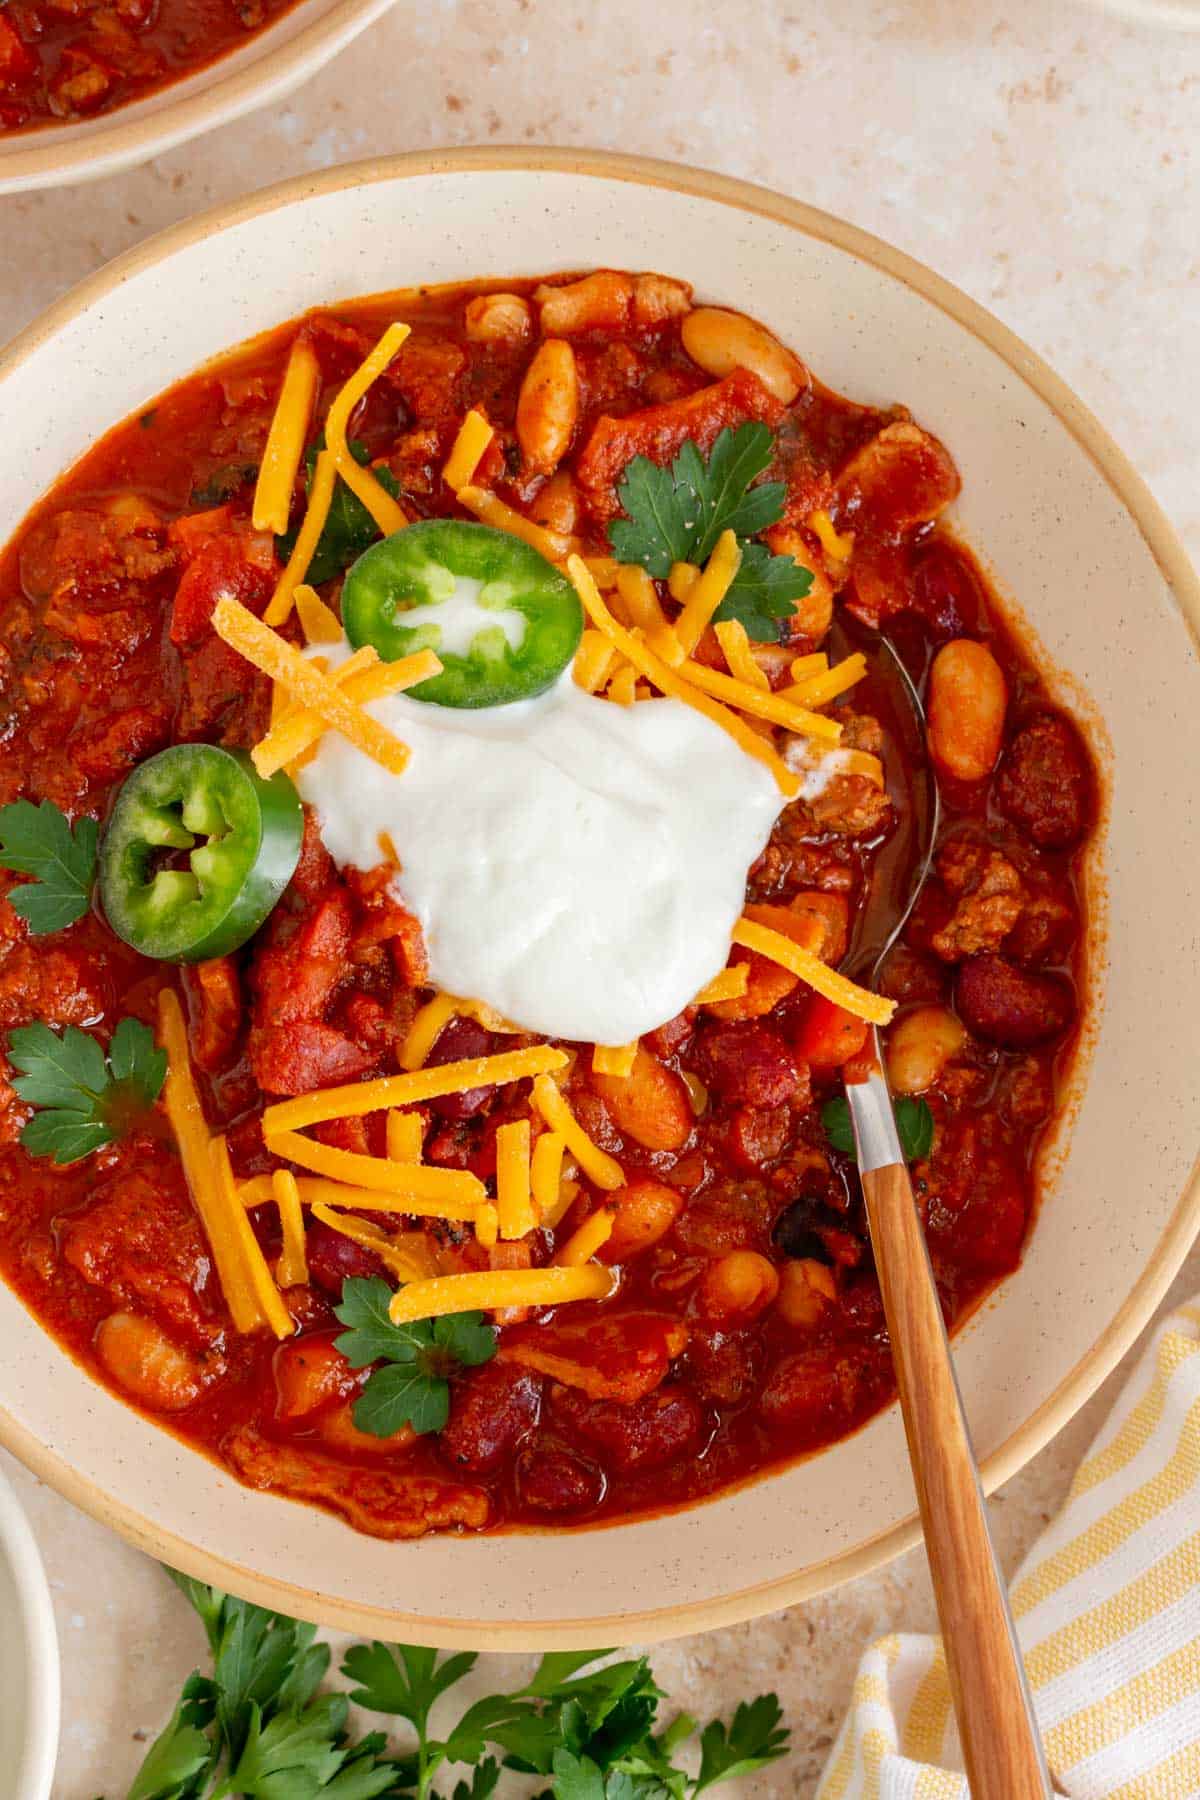 A close up of a bowl of Dutch oven chili topped with sour cream, shredded chili, jalapeno, and cilantro with a spoon inside.